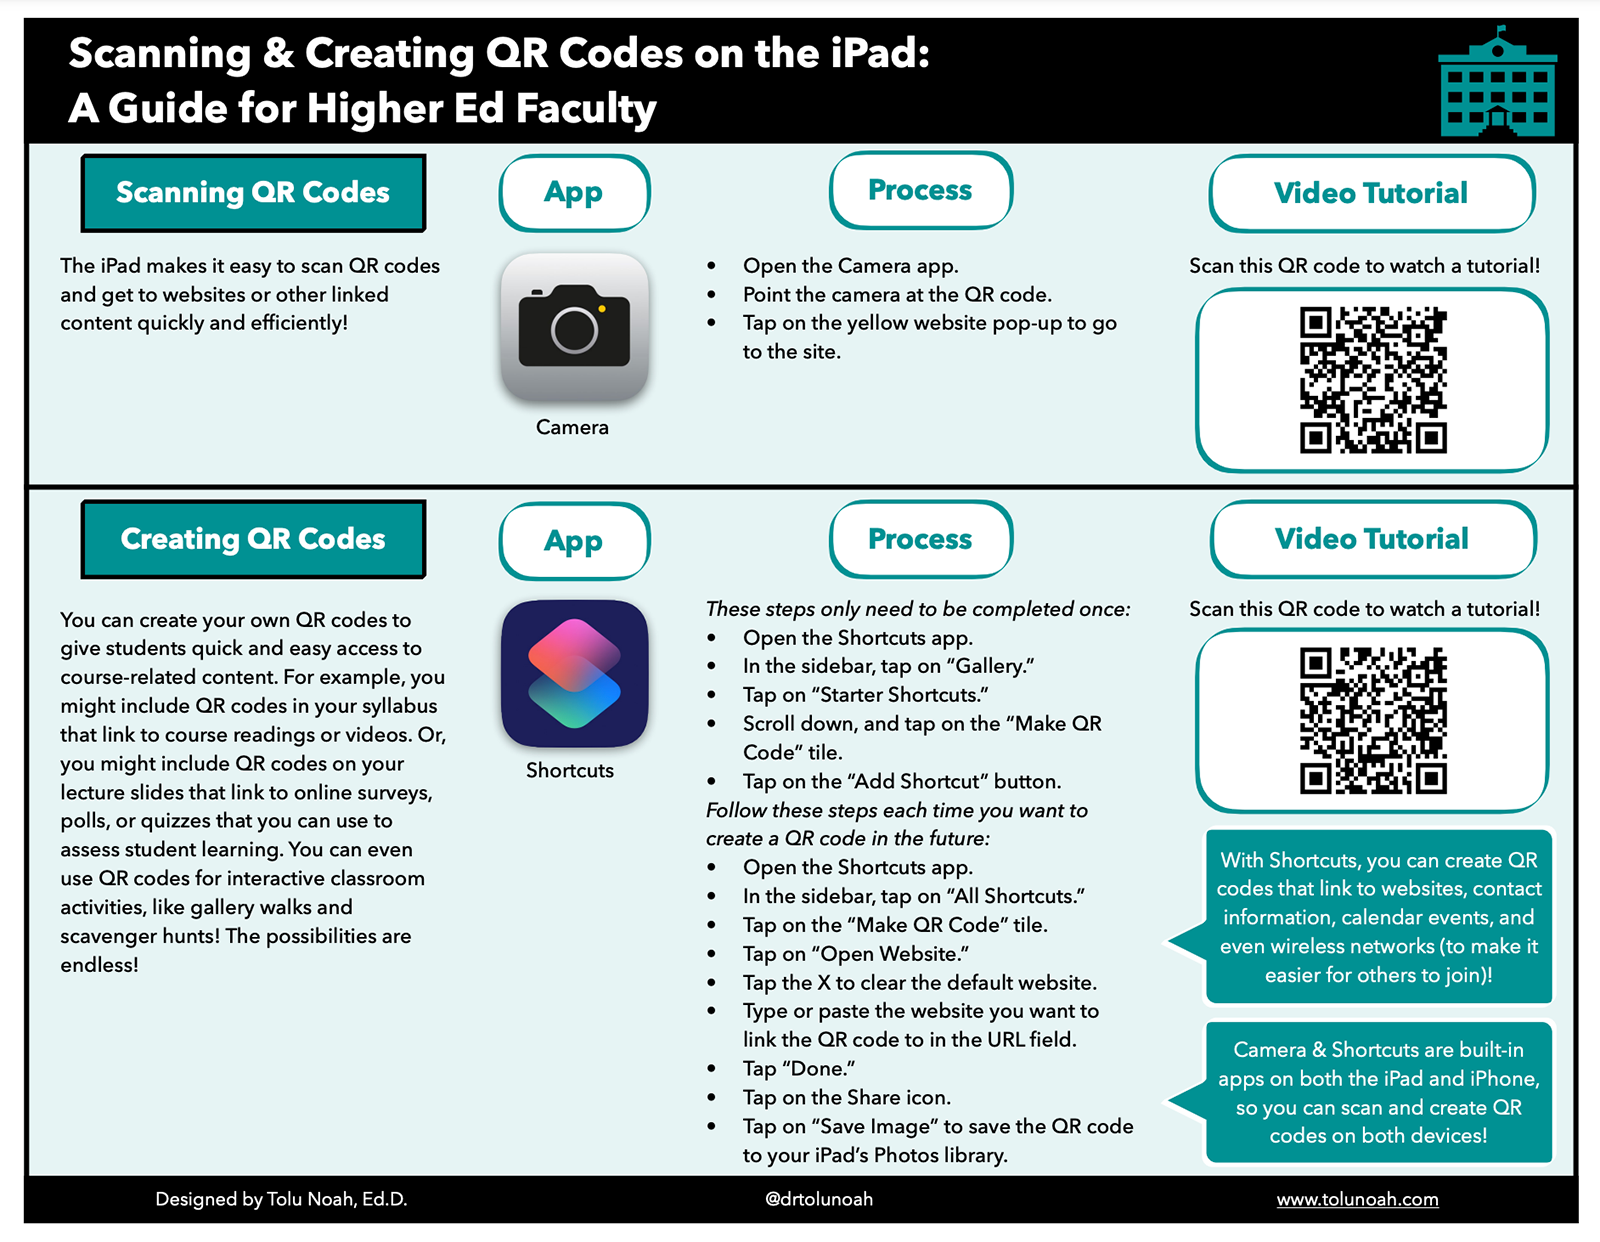 A Step-by-Step Guide to Scanning QR Codes From Your Phone's Photo